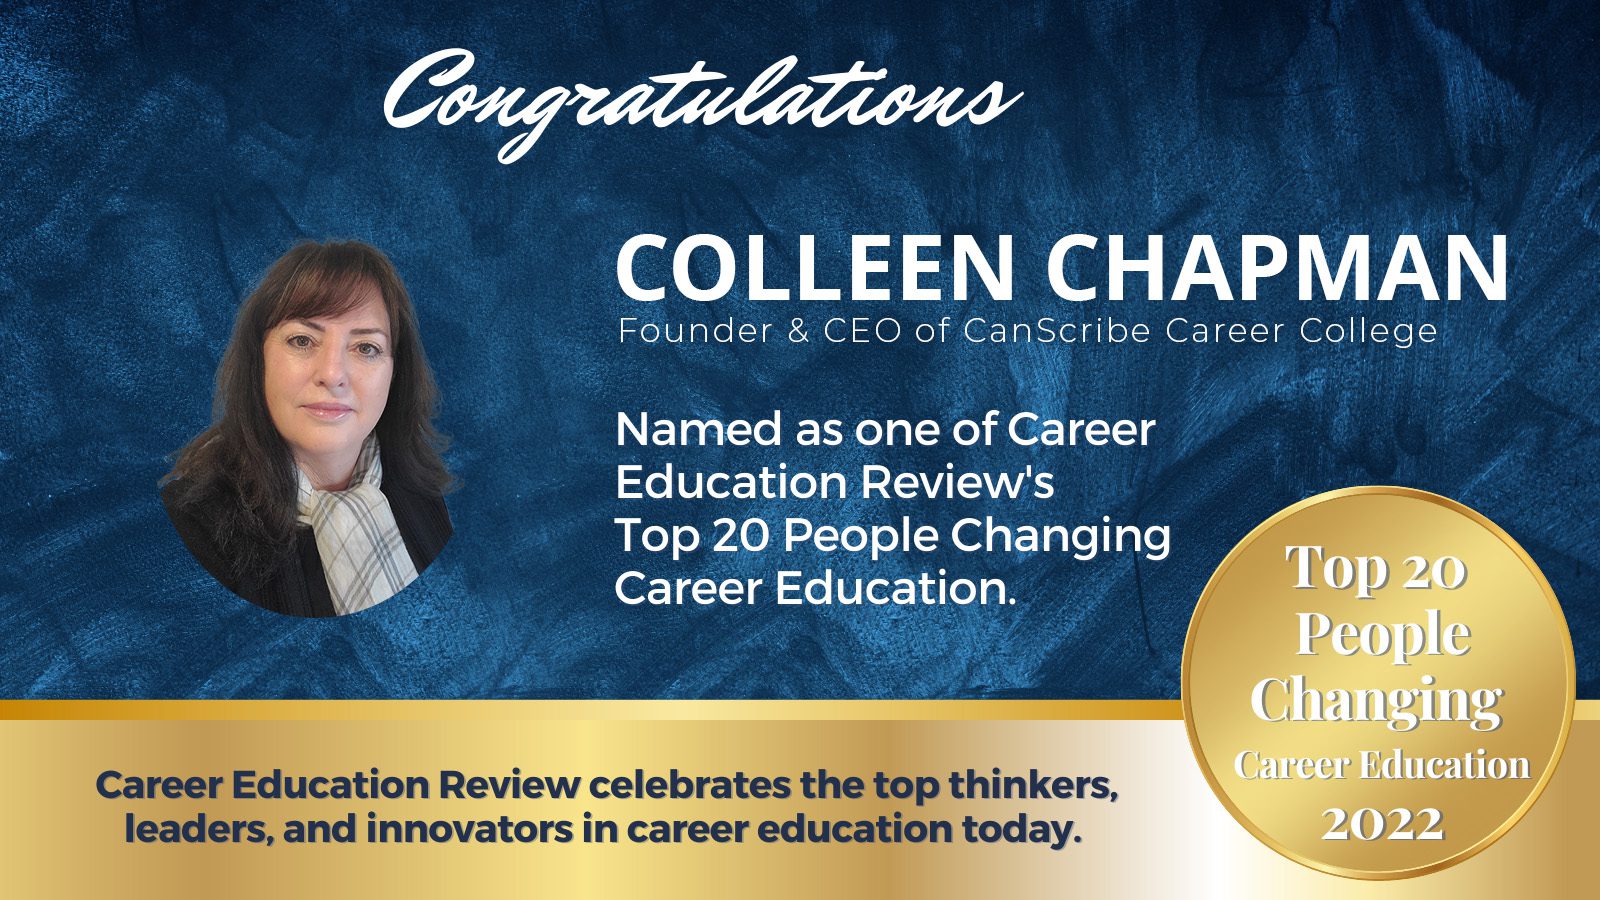 Top 20 People Changing Career Education 